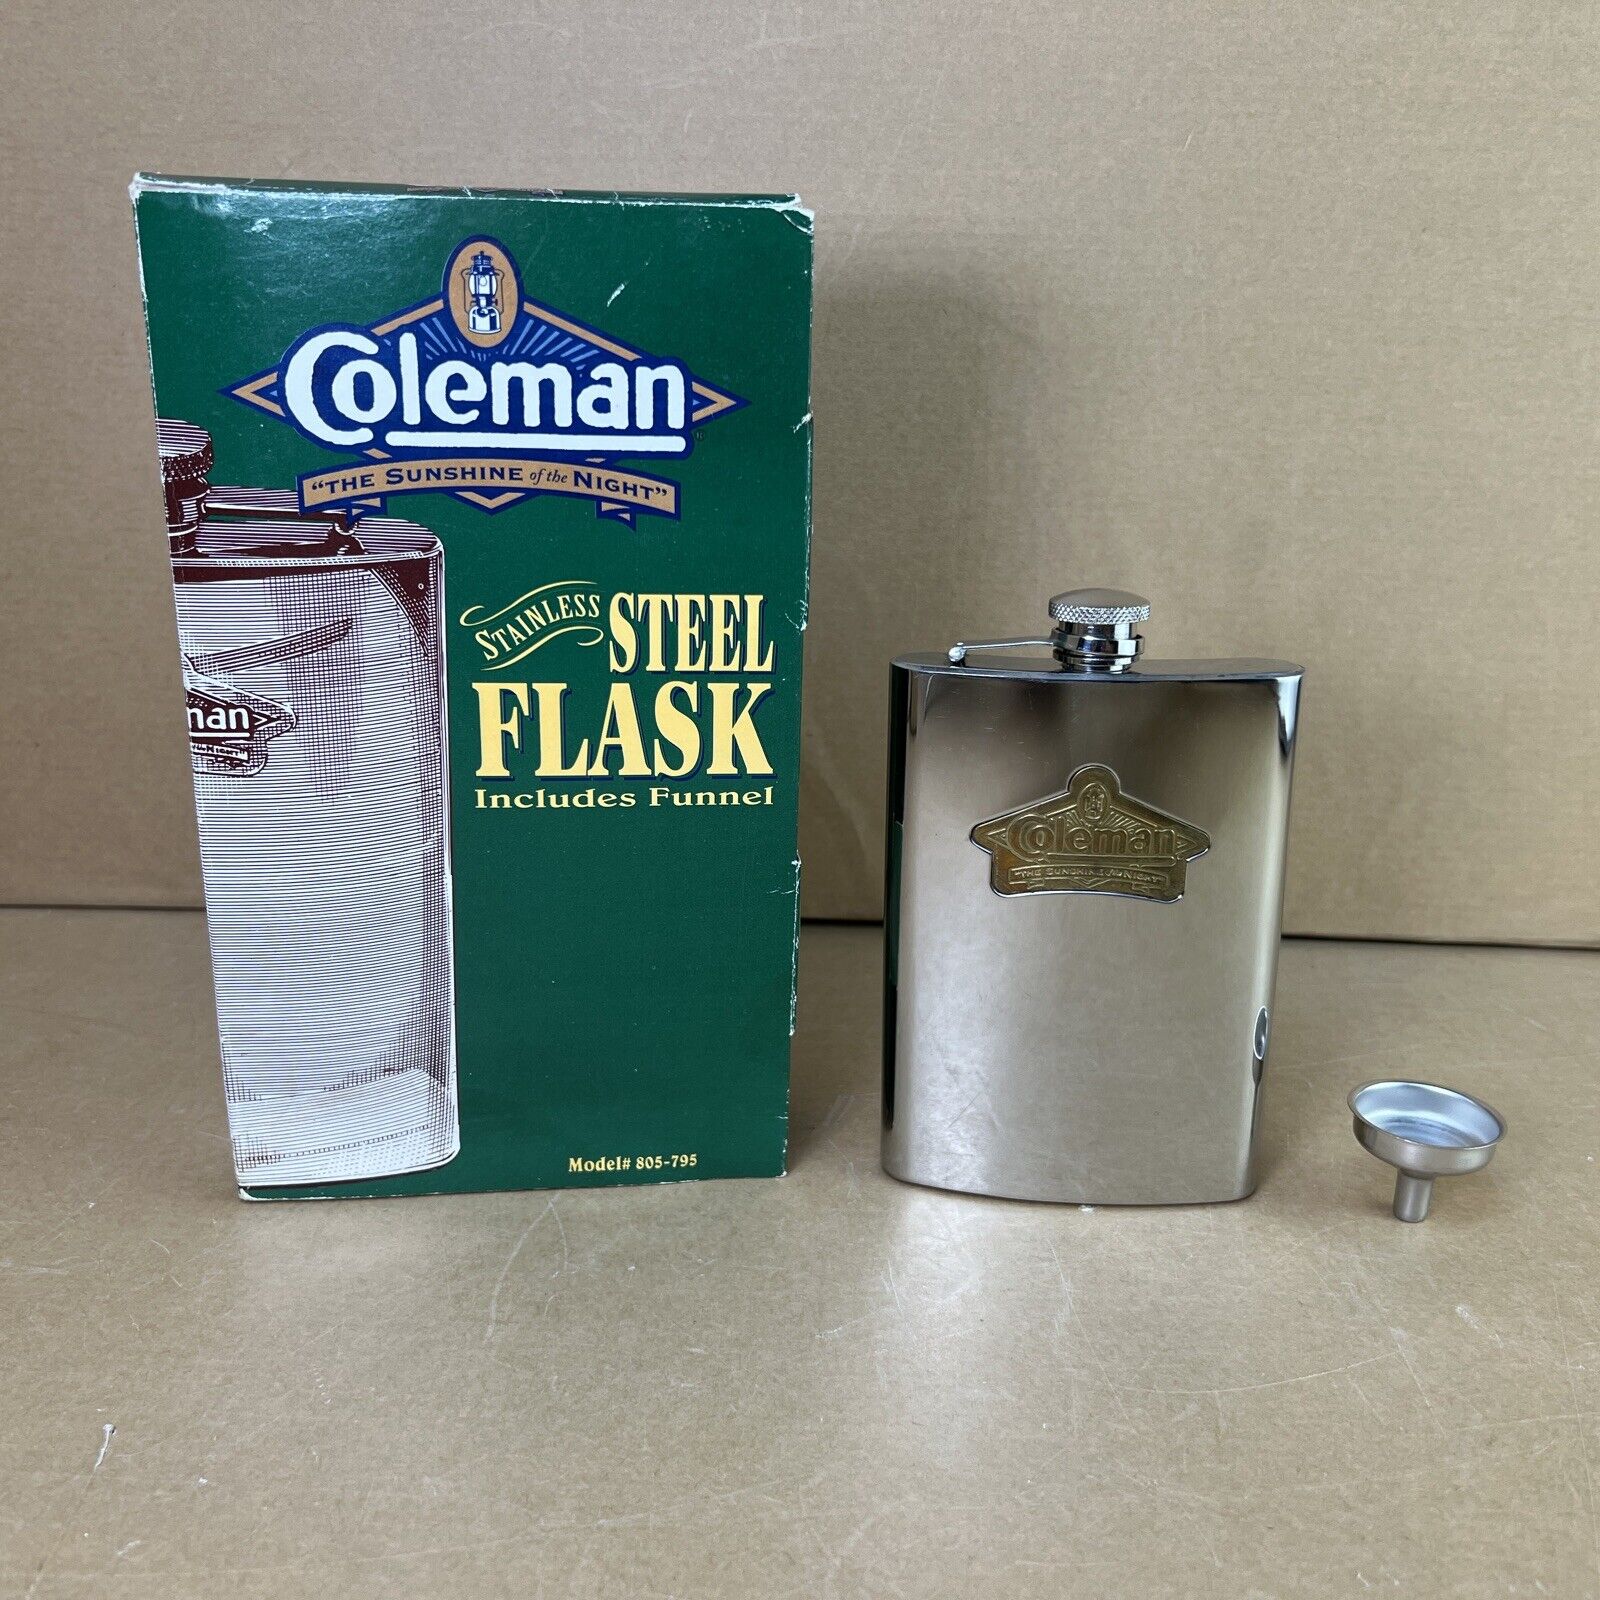 Vintage Coleman “the Sunshine Of The Night” Stainless Steel Flask With Box